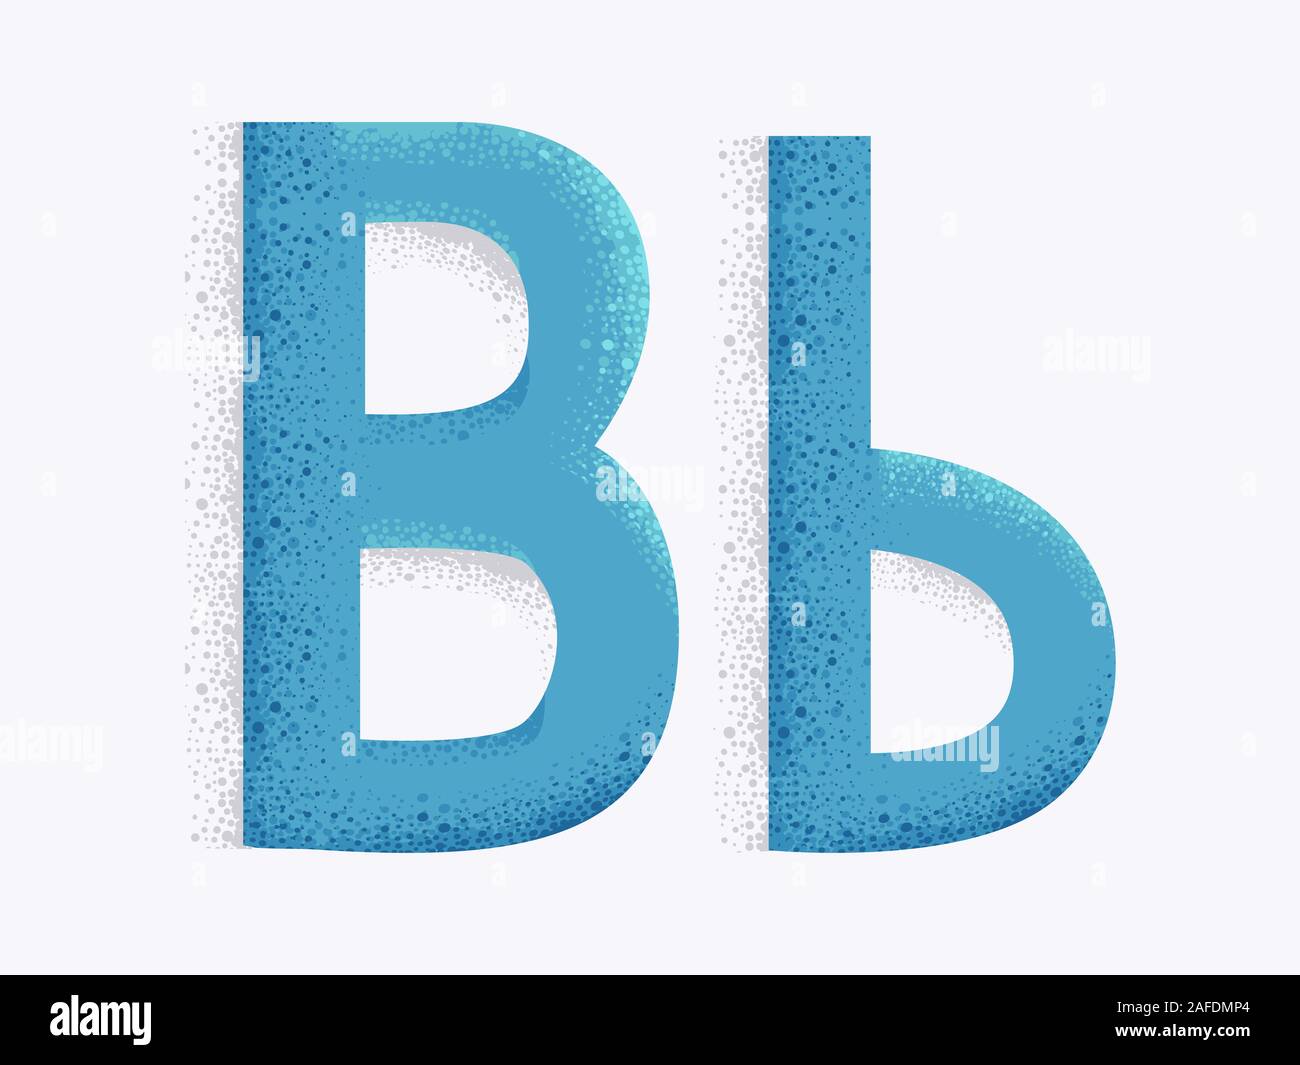 Illustration of Decorative Alphabet with Capital and Small Letter B and Dust Particle Effect Stock Photo